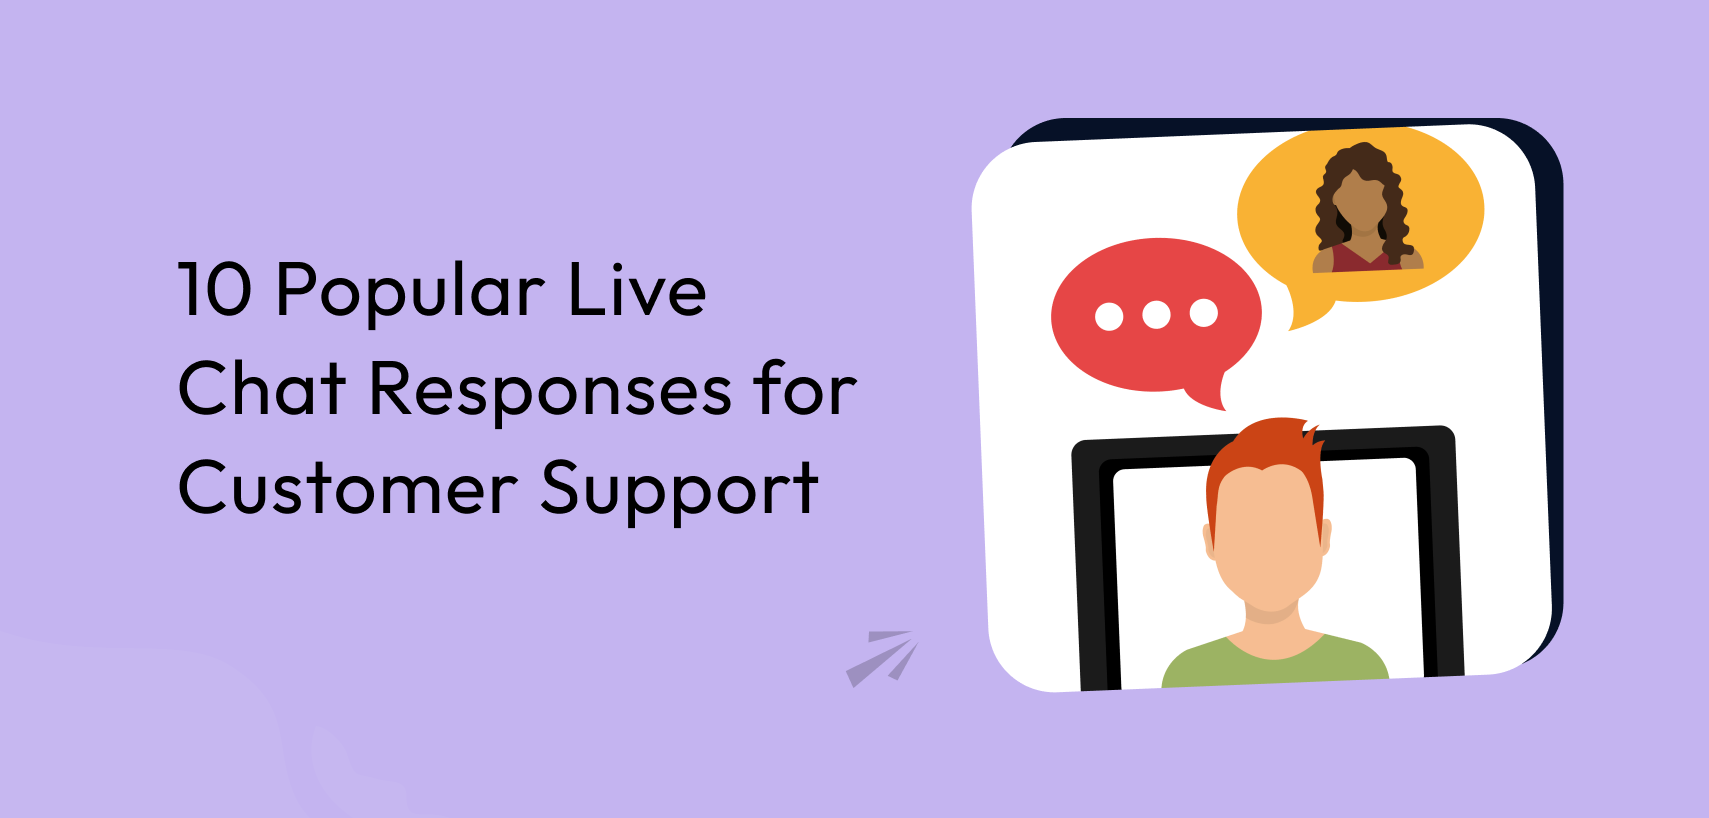 10 Popular Live Chat Responses for Customer Support